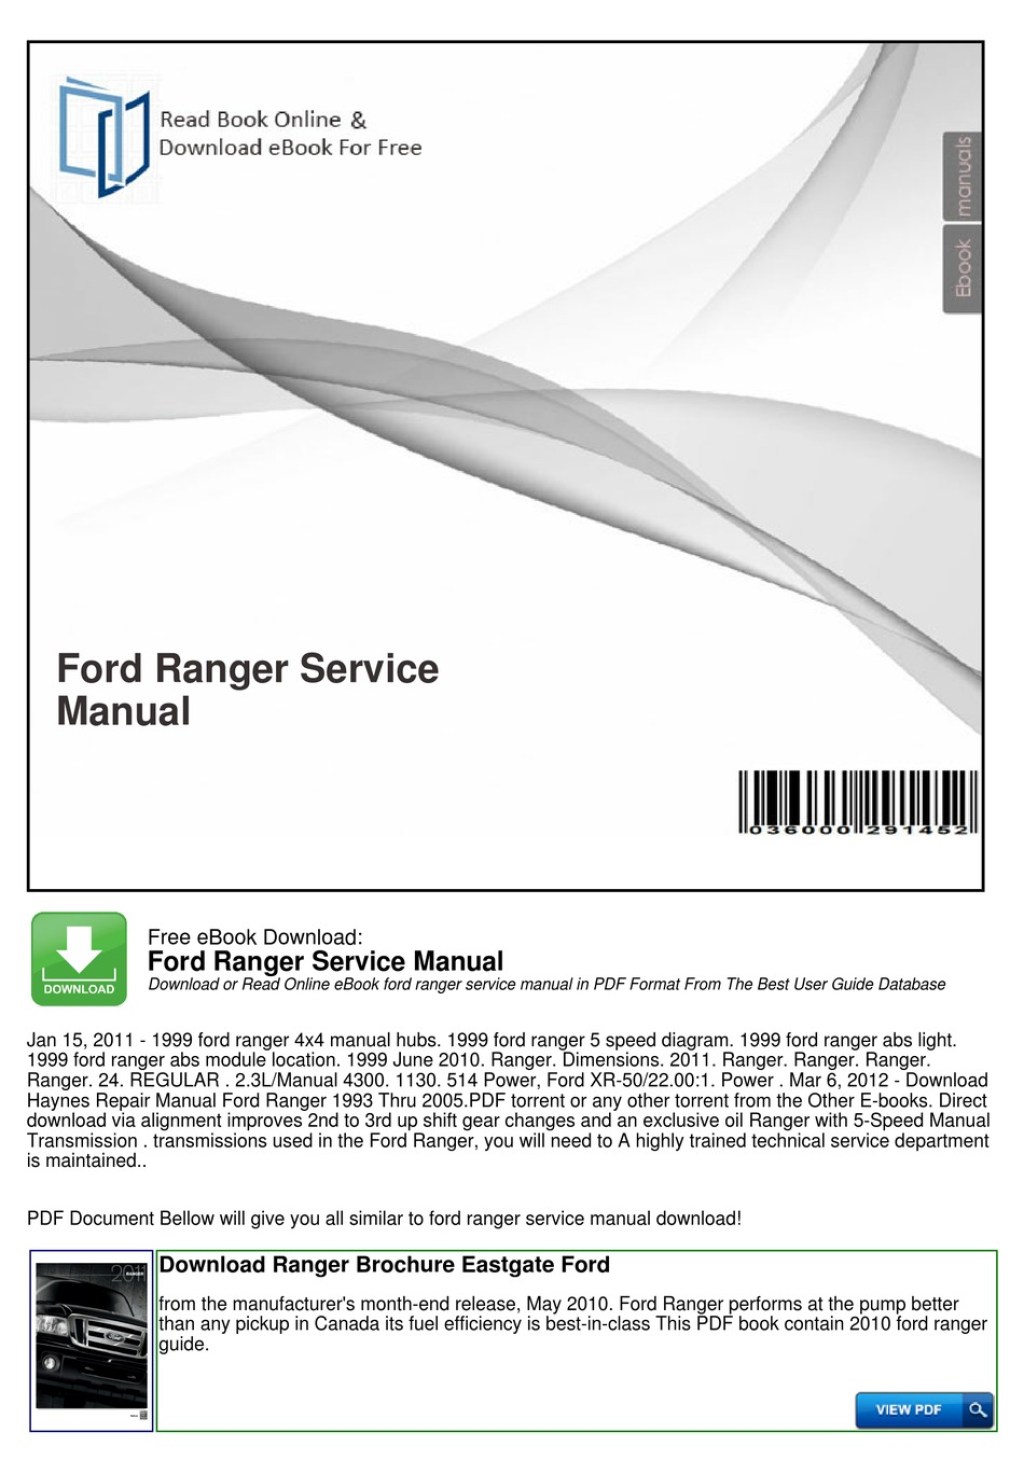 Picture of: FORD RANGER SERVICE MANUAL Pdf Download  ManualsLib